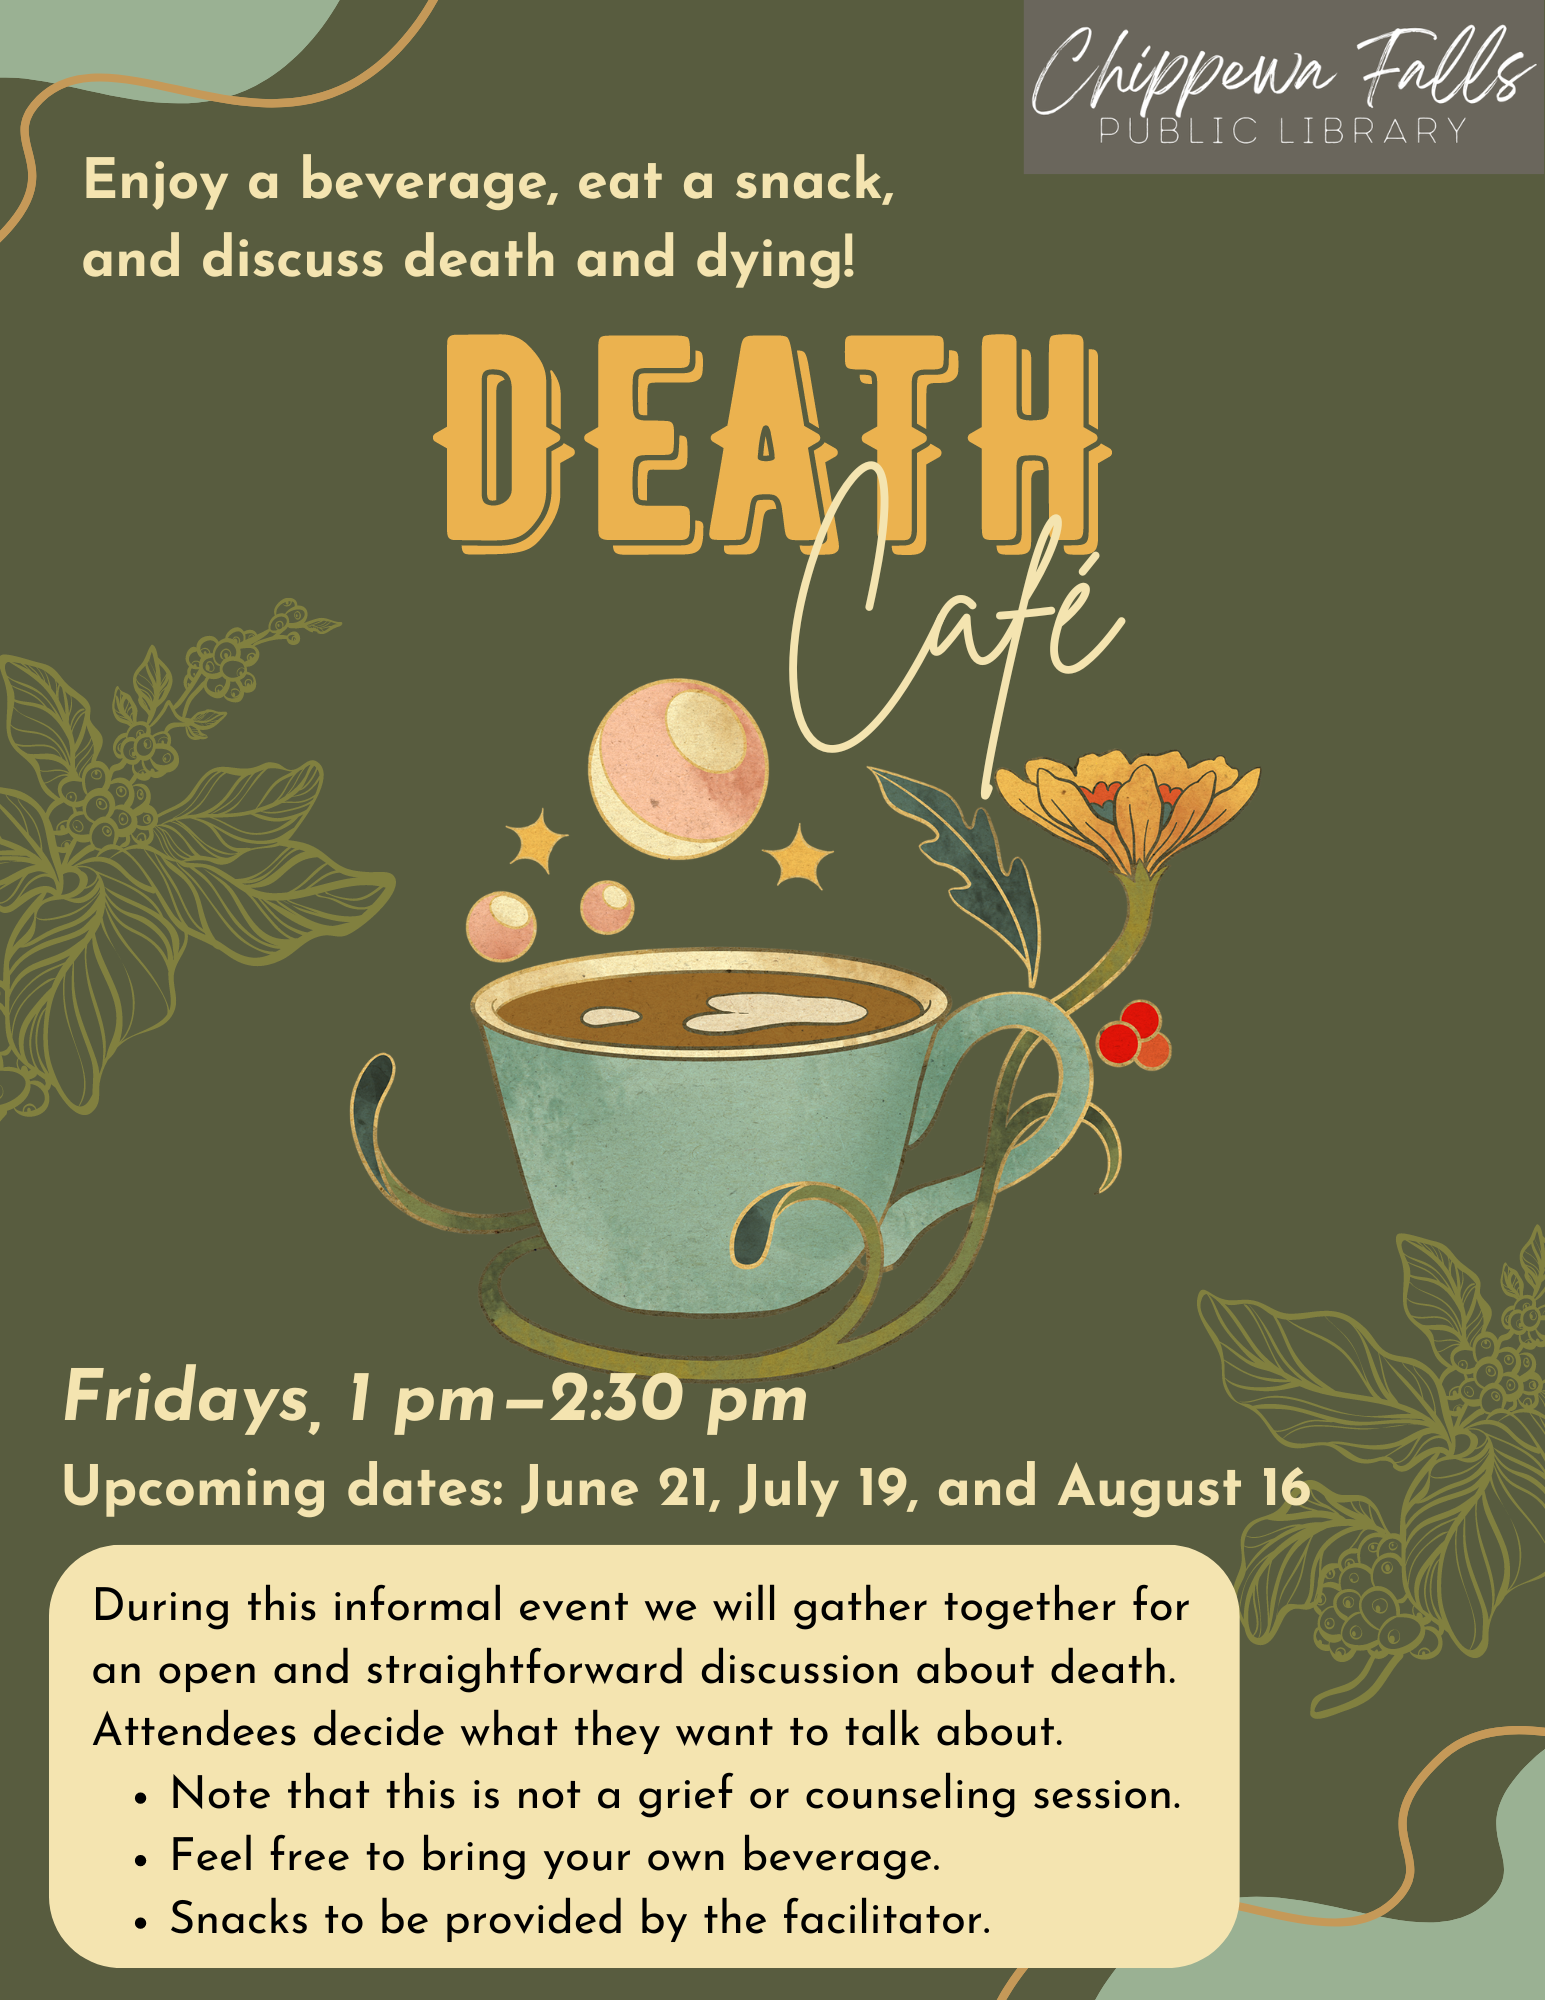 Poster for the Death Cafe Event, June, 21, July 19 and August 16, from 1 to 2:30pm. Enjoy a beverage, eat a snack, and discuss death and dying! During this informal event we will gather together for an open and straightforward discussion about death. Attendees decide what they want to talk about. Note that this is not a grief or counseling session. Feel free to bring your own beverage. Snacks to be provided by the facilitator.